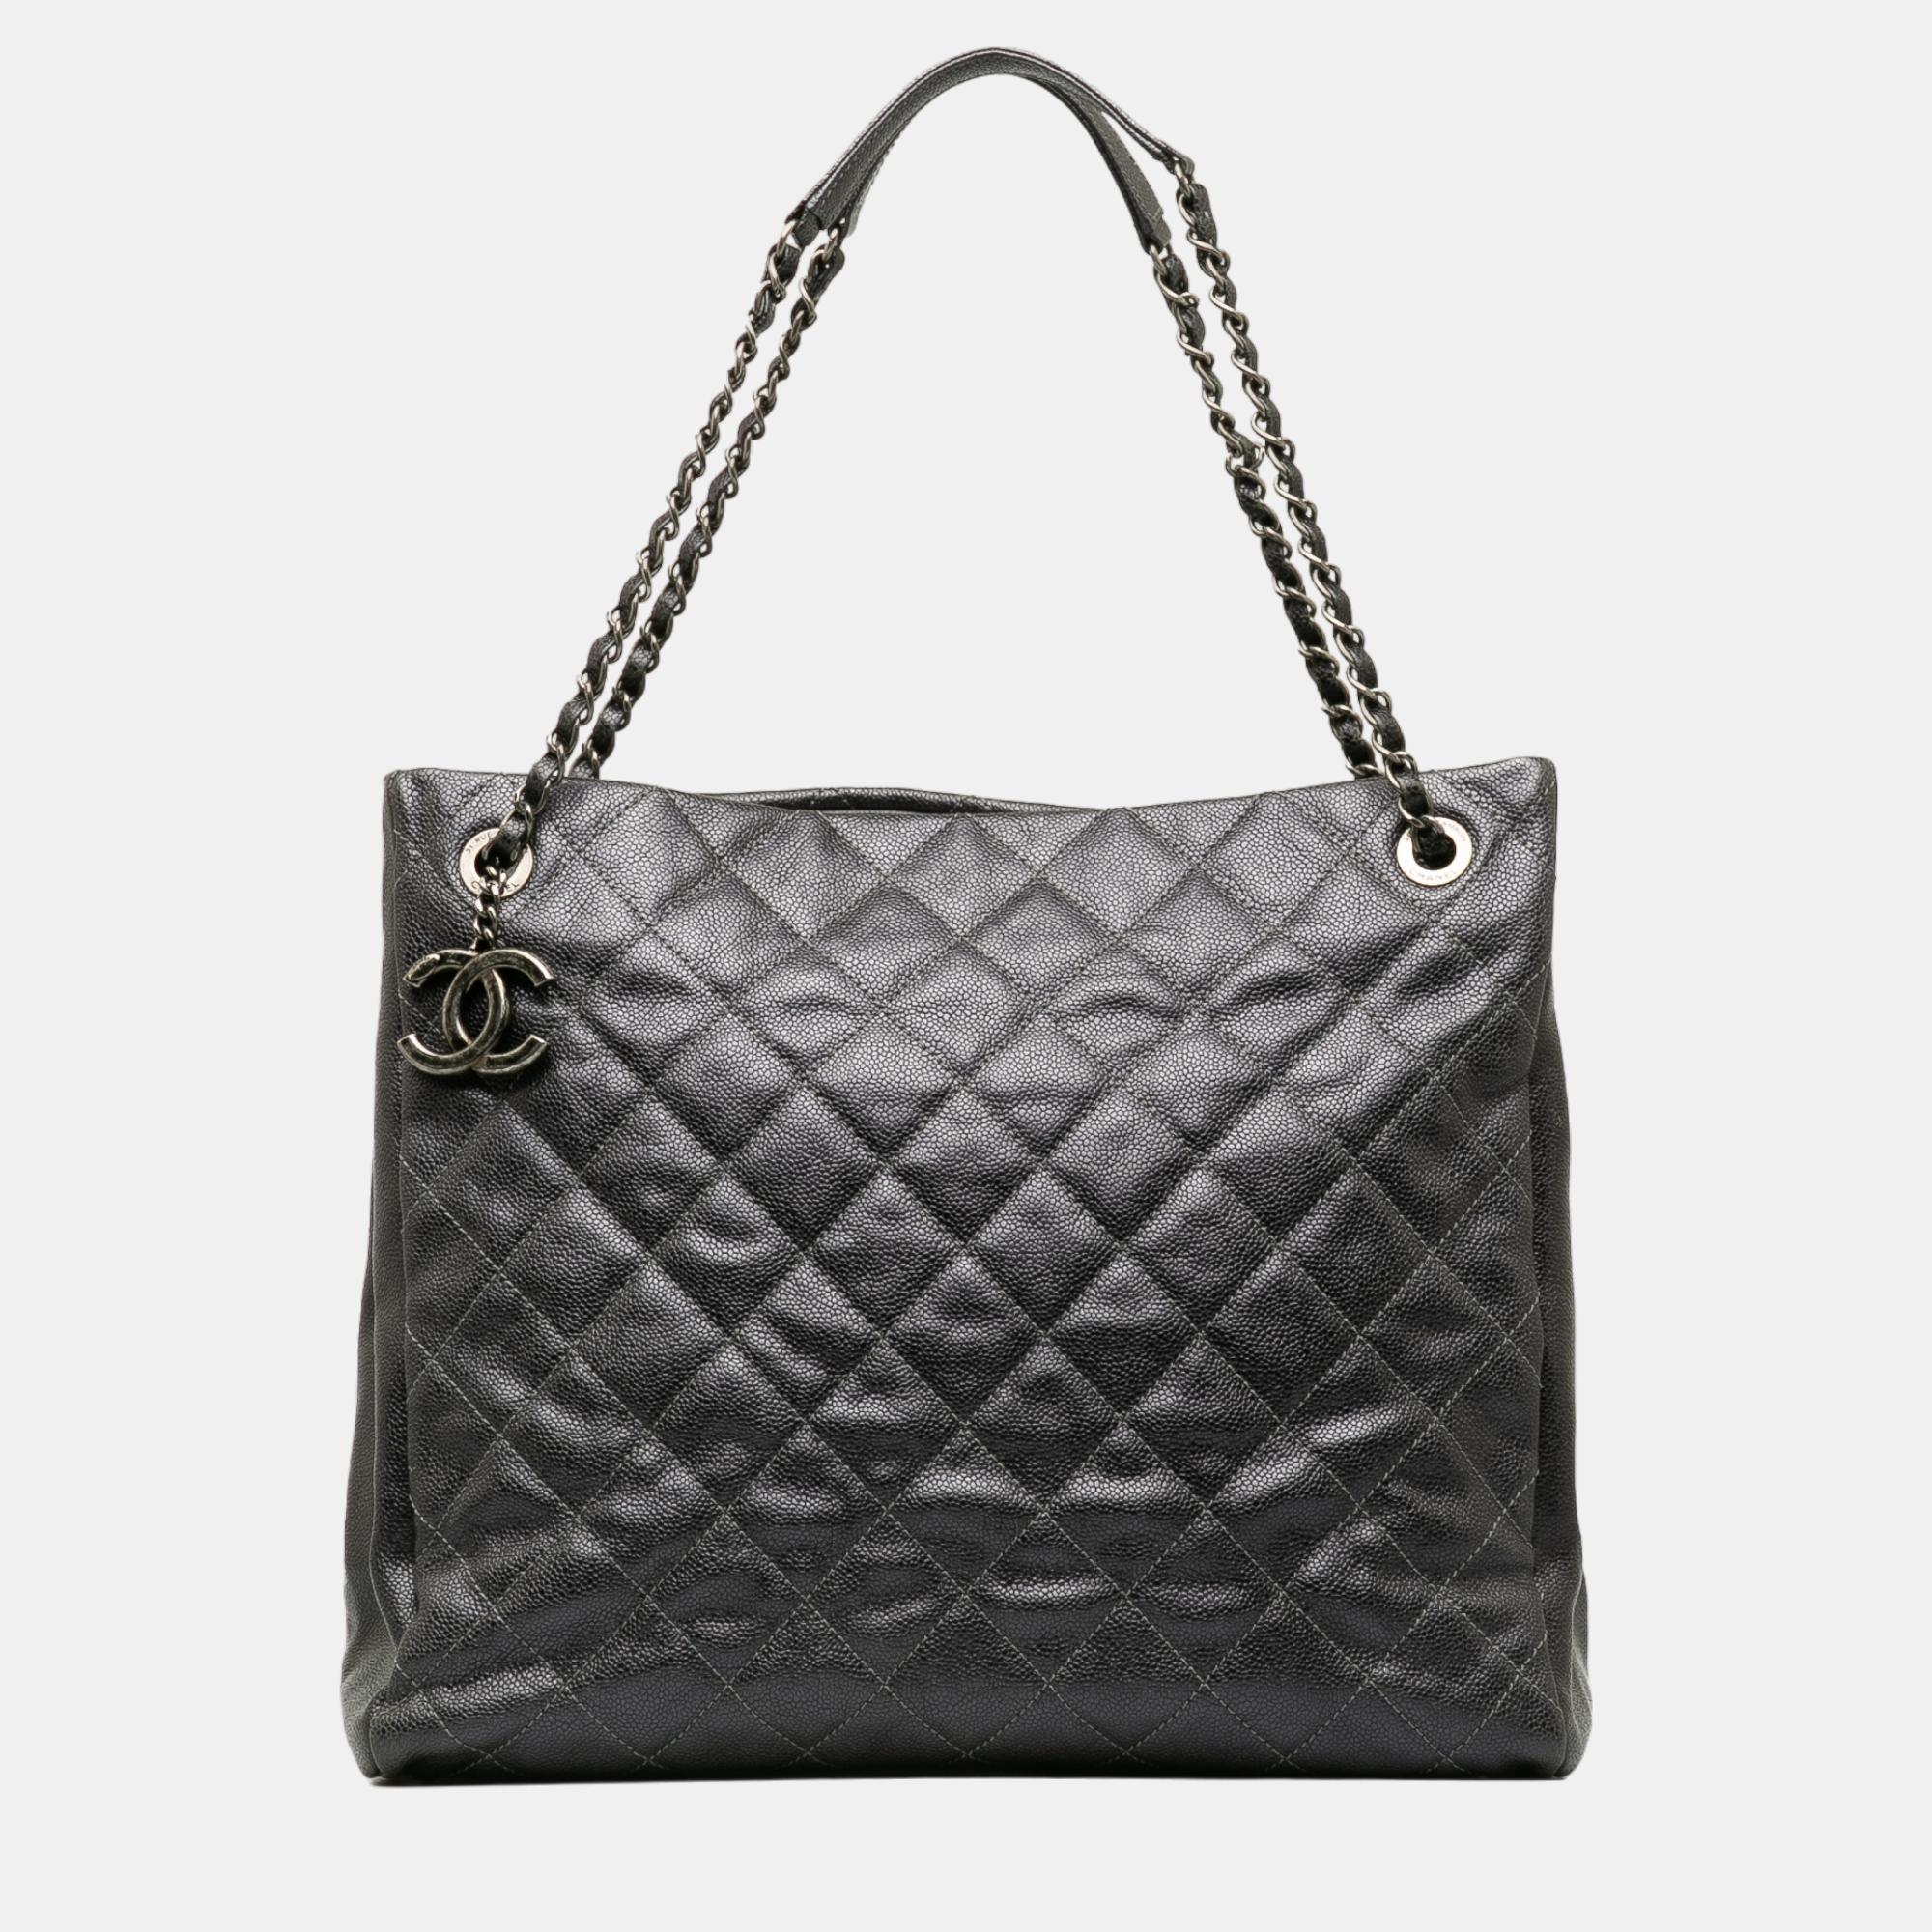 Pre-owned Chanel Black Large Caviar Chic Shopping Tote